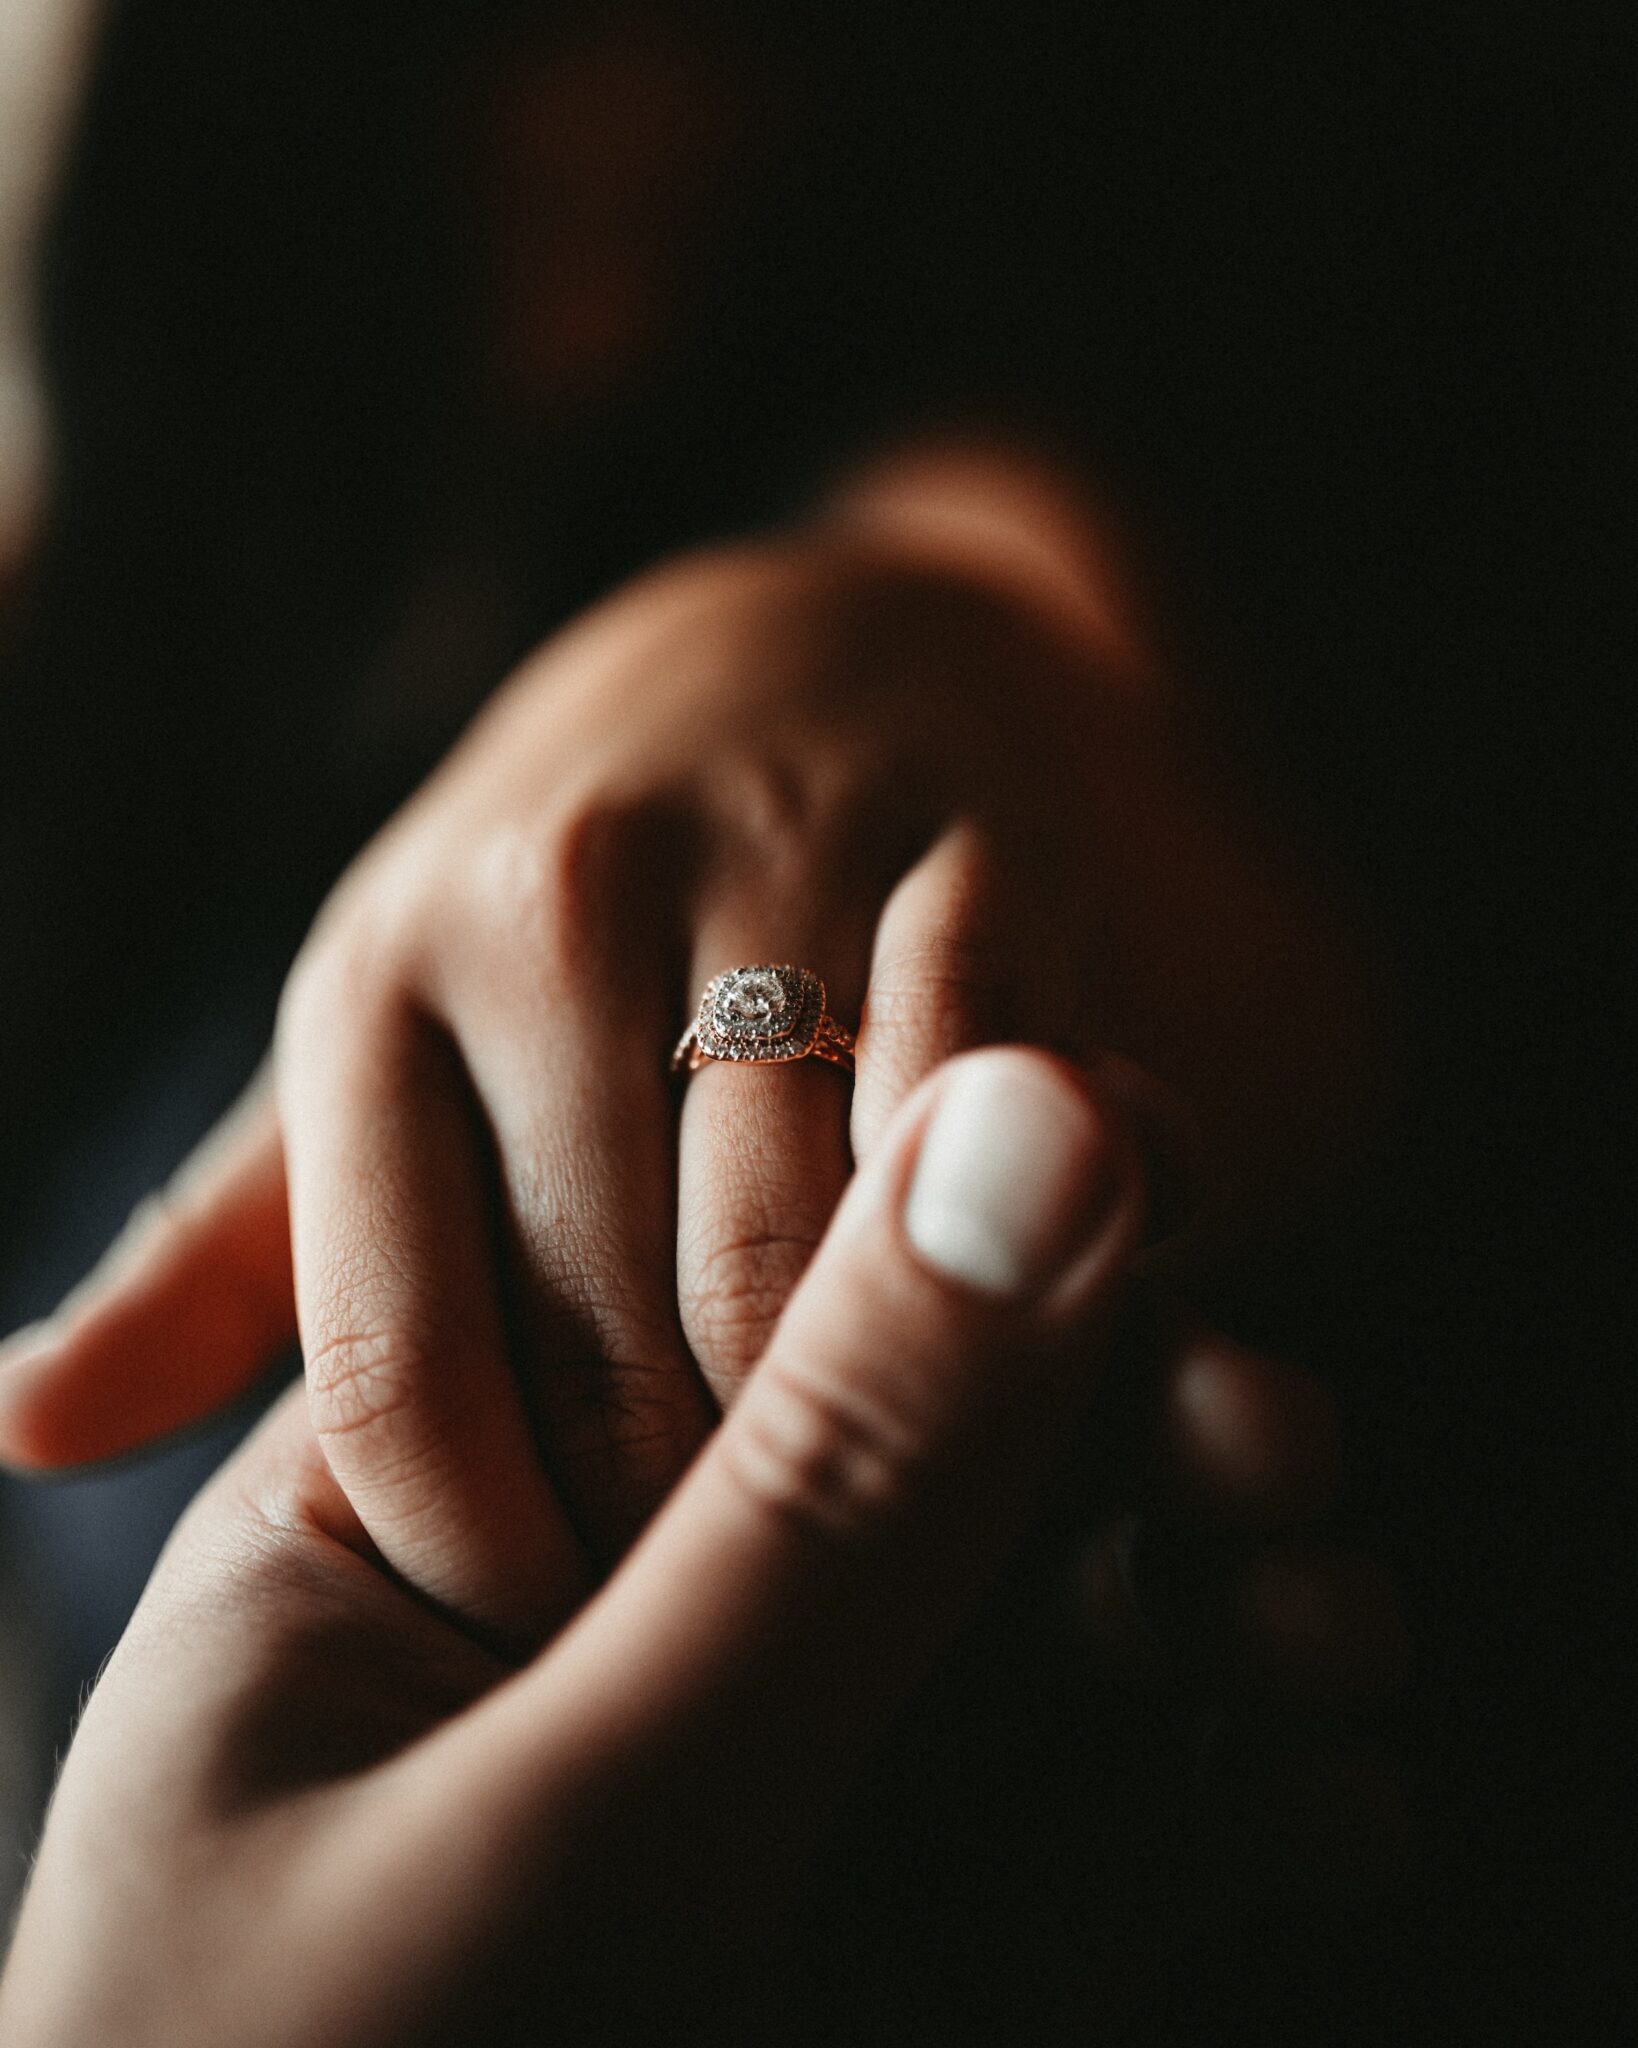 Top Ten Marriage Proposal Dos and Don'ts